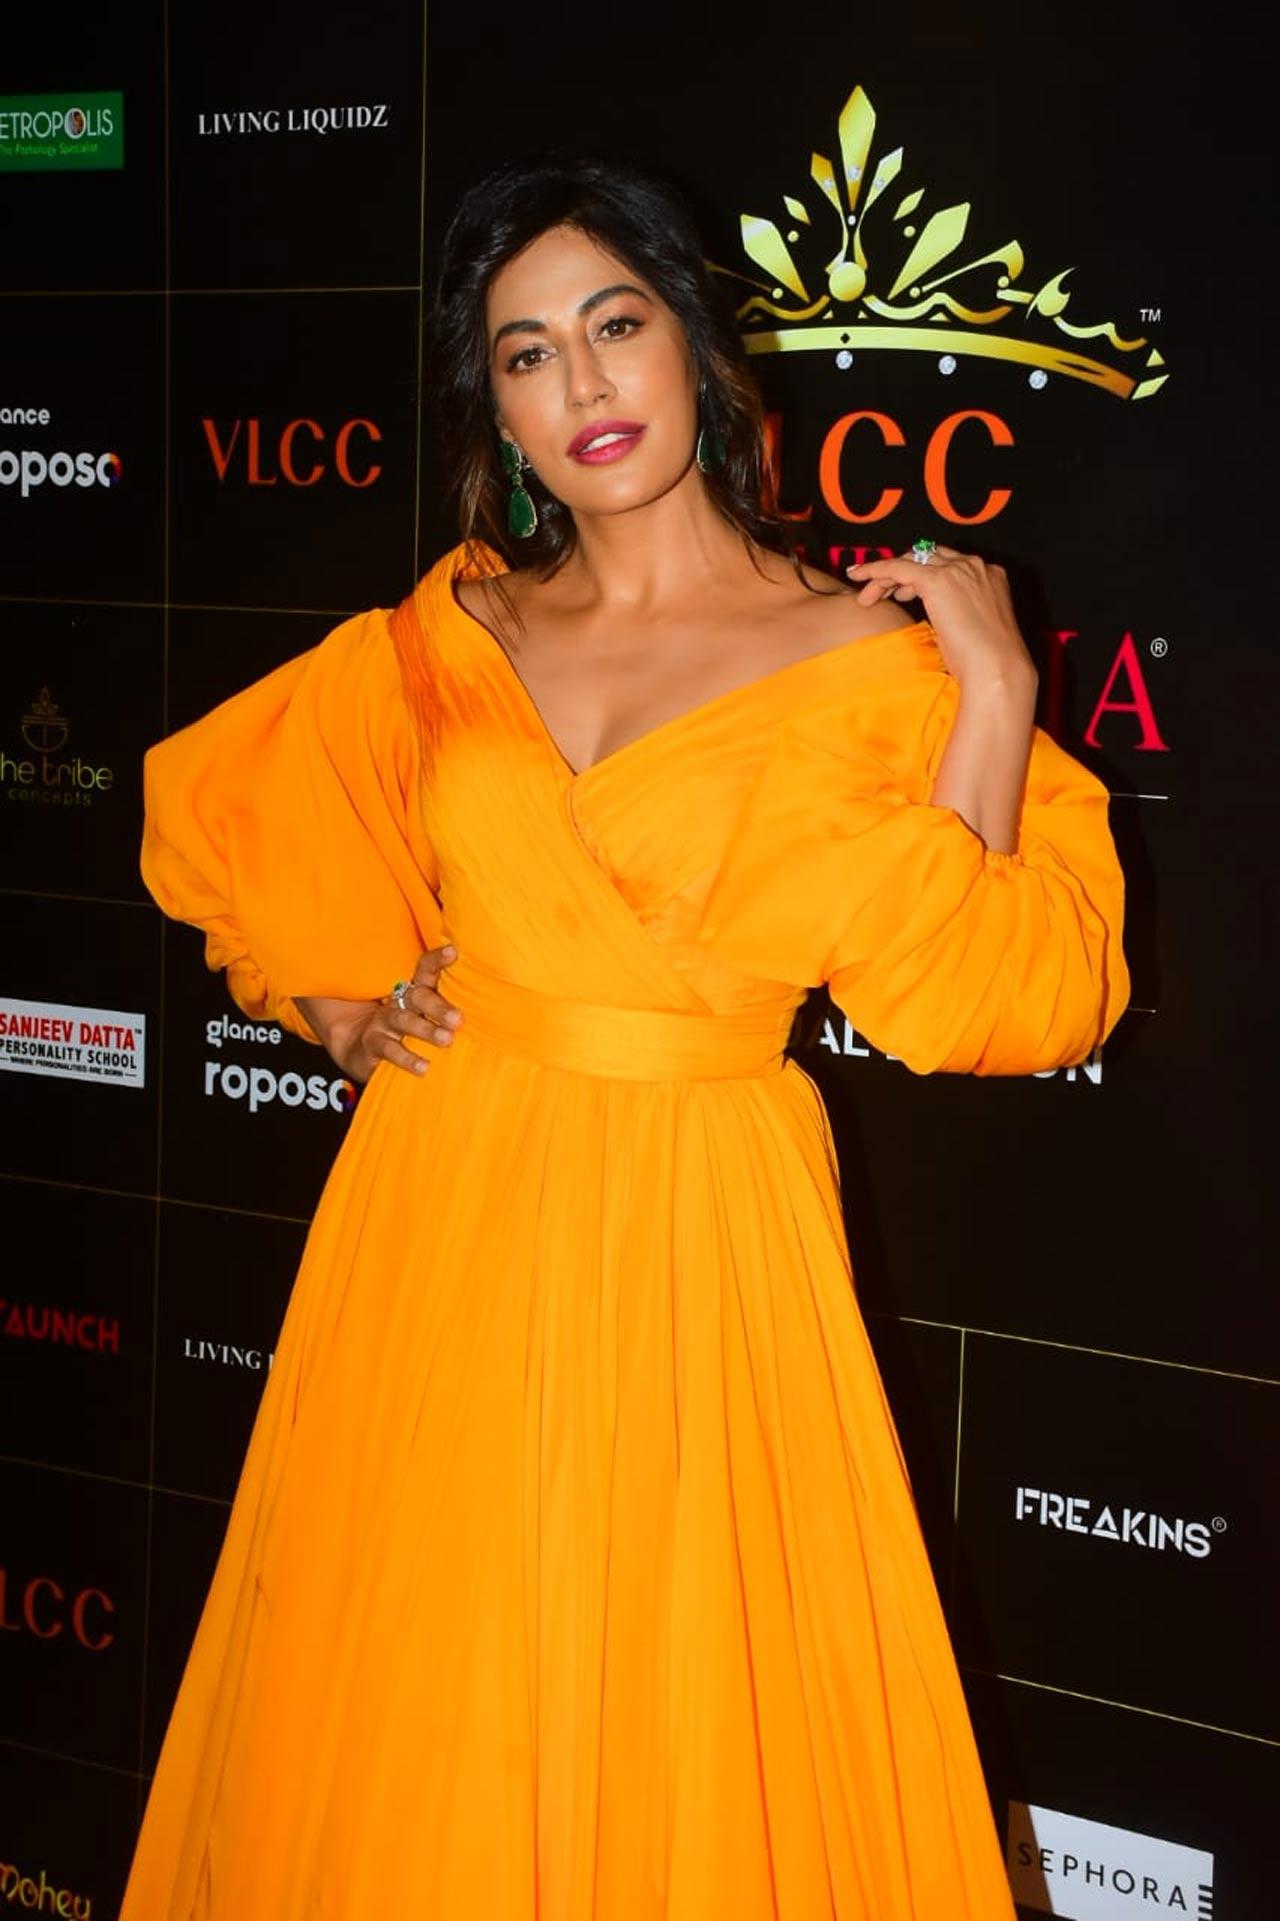 Chitrangda Singh, who was also one of the jury members at the event, twirled her way in a bright yellow off-shoulder gown. Her flowy A-line dress was definitely an outstanding pick to attend the ceremony hosted in the city.